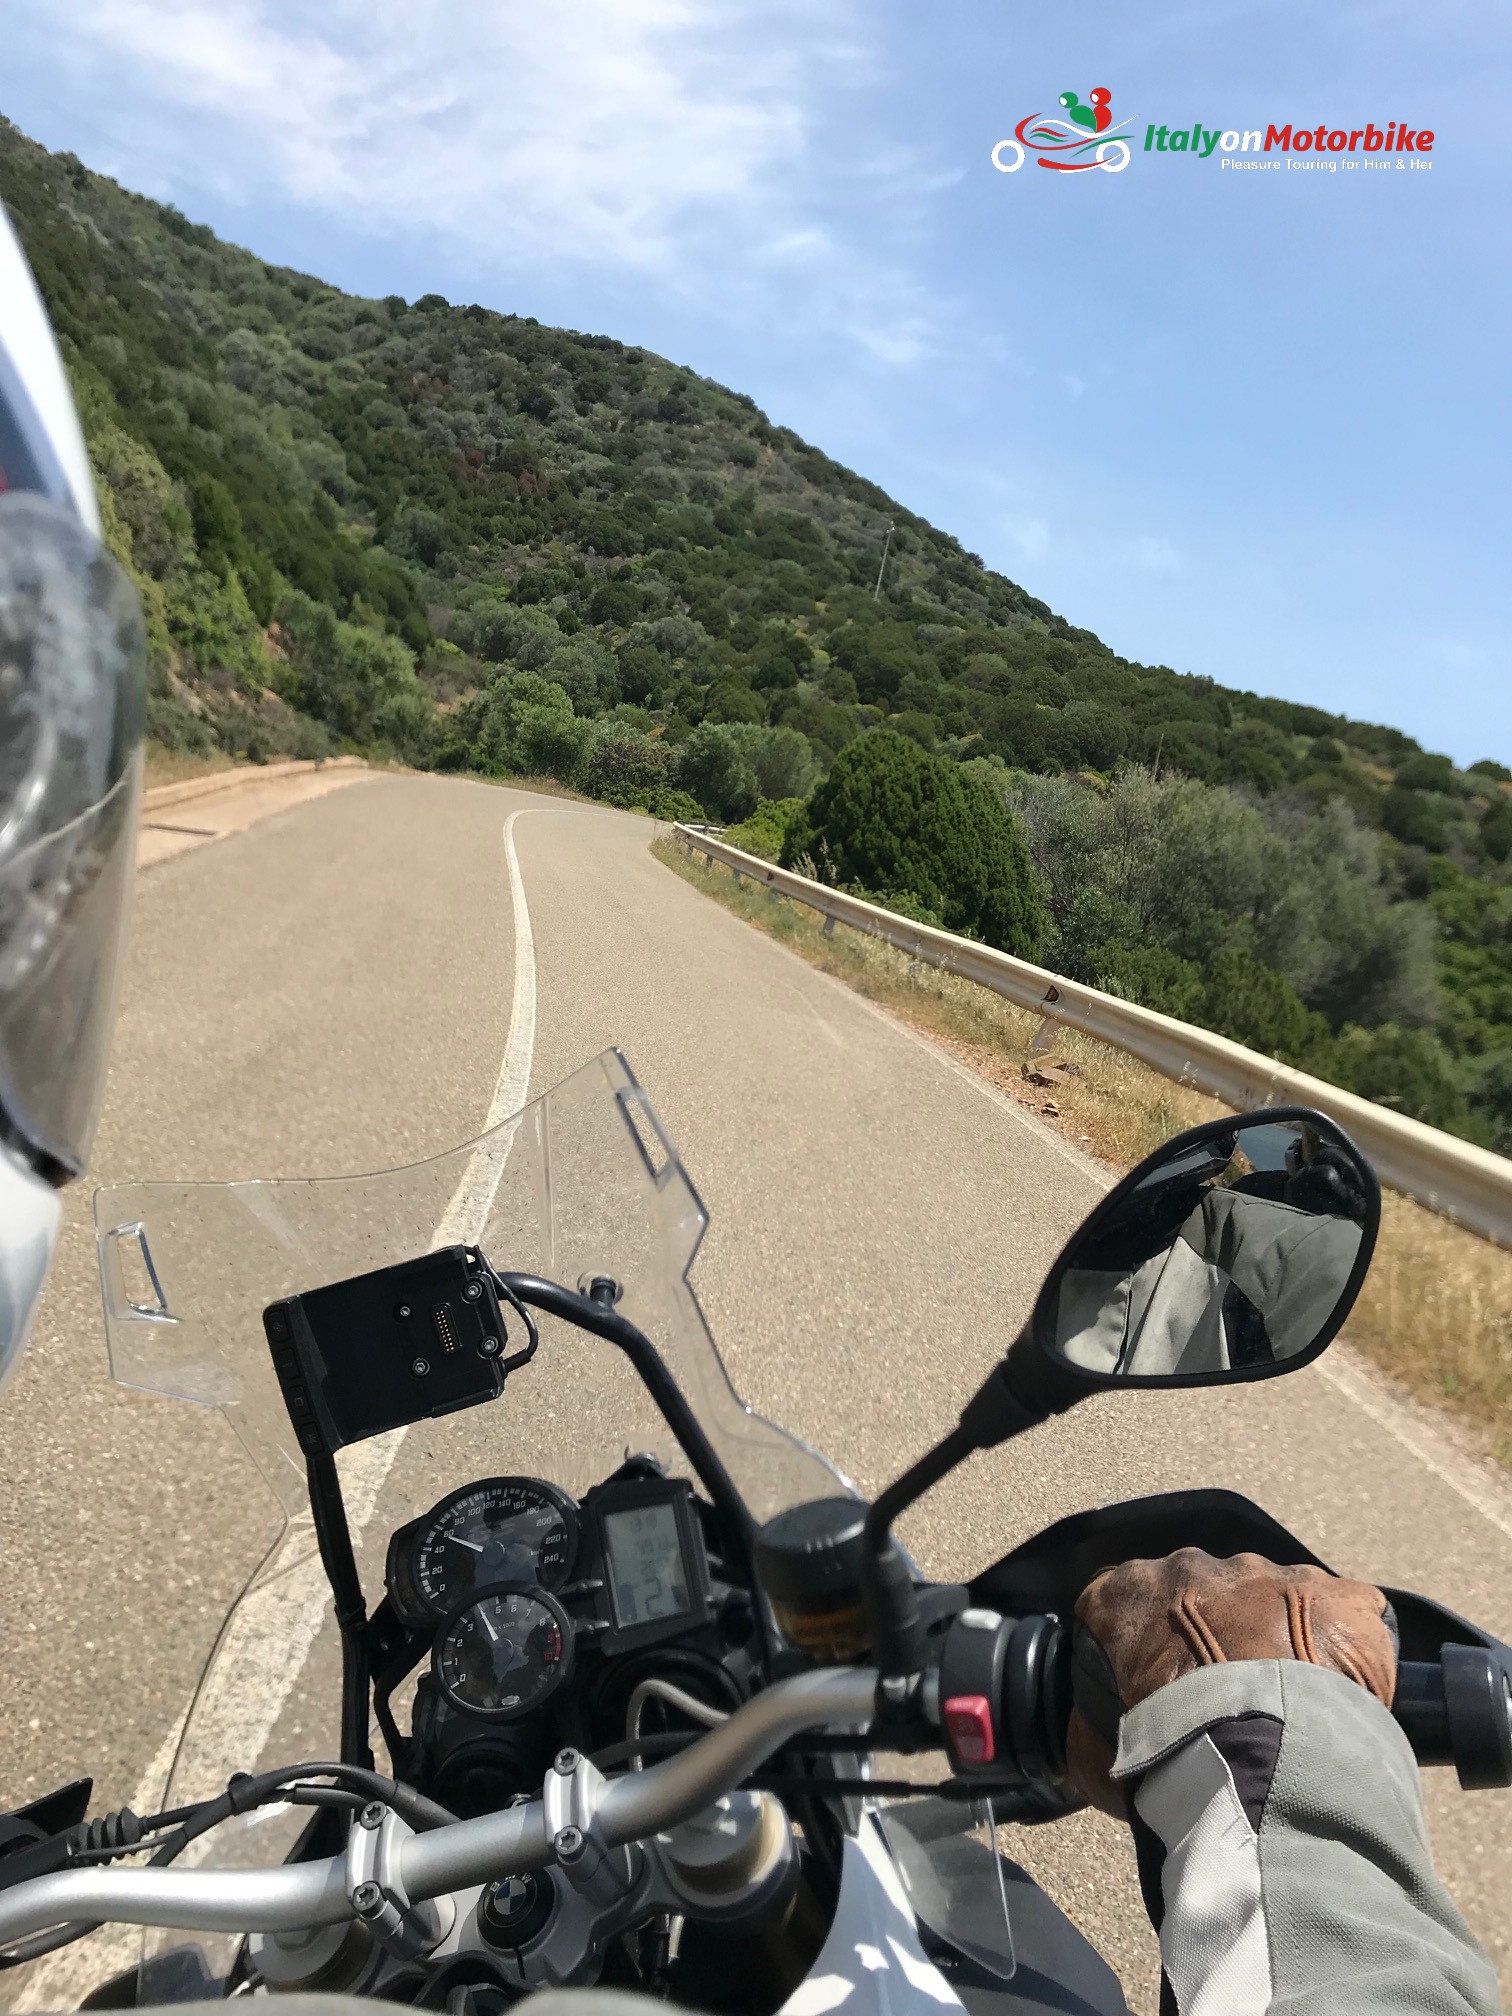 A twisty road inland in Sardinia on one of our motorcycle tour in Italy